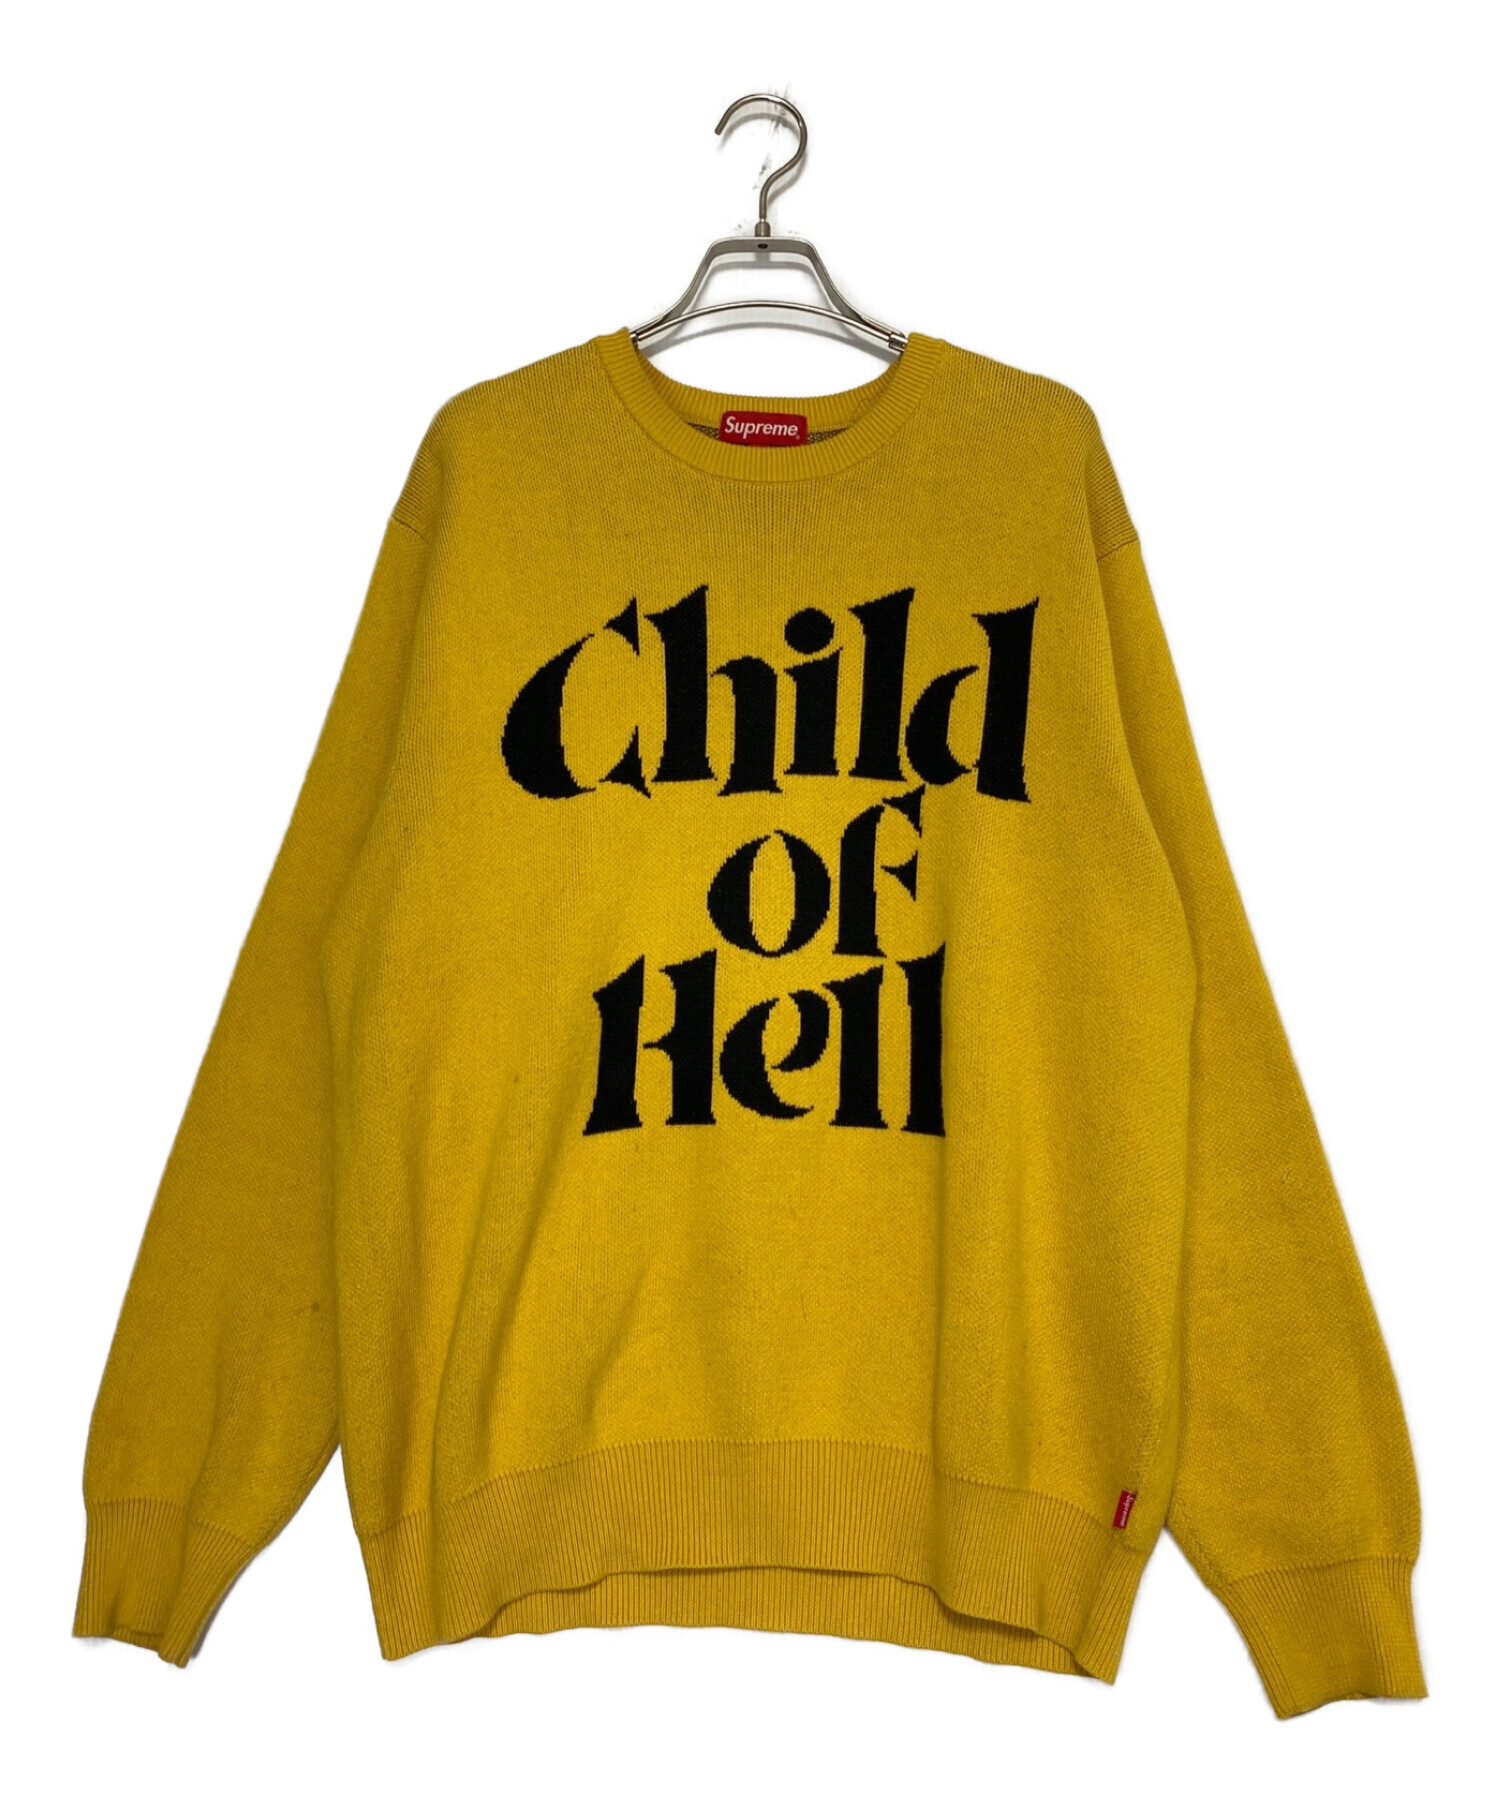 Child of Hell Sweater supreme 名作 希少